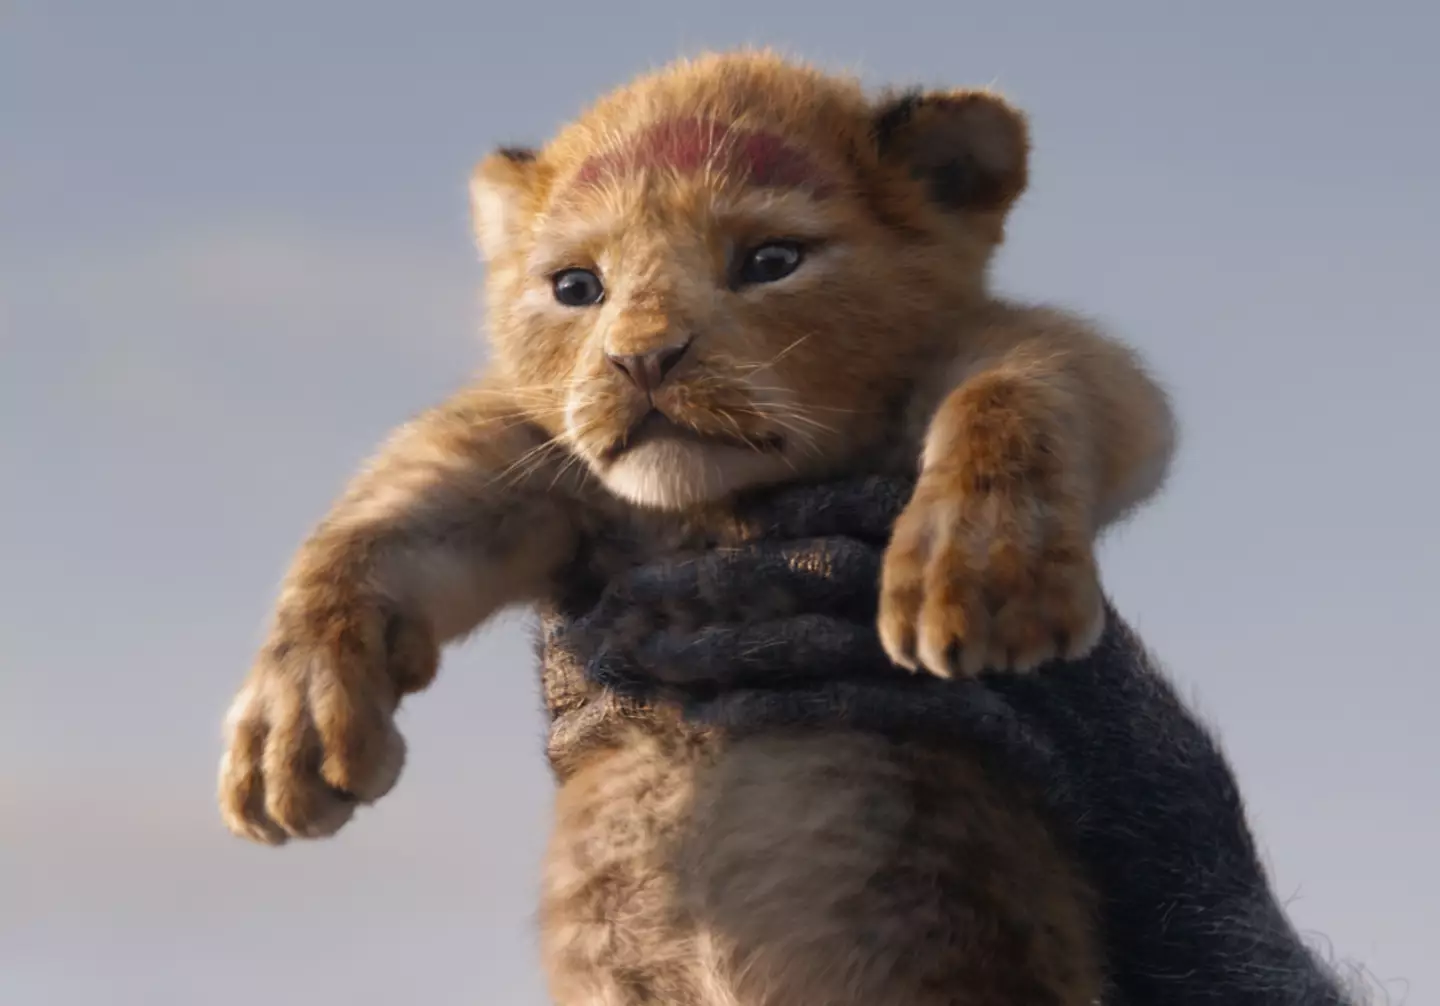 Simba was voiced by Donald Glover in the 2019 remake.